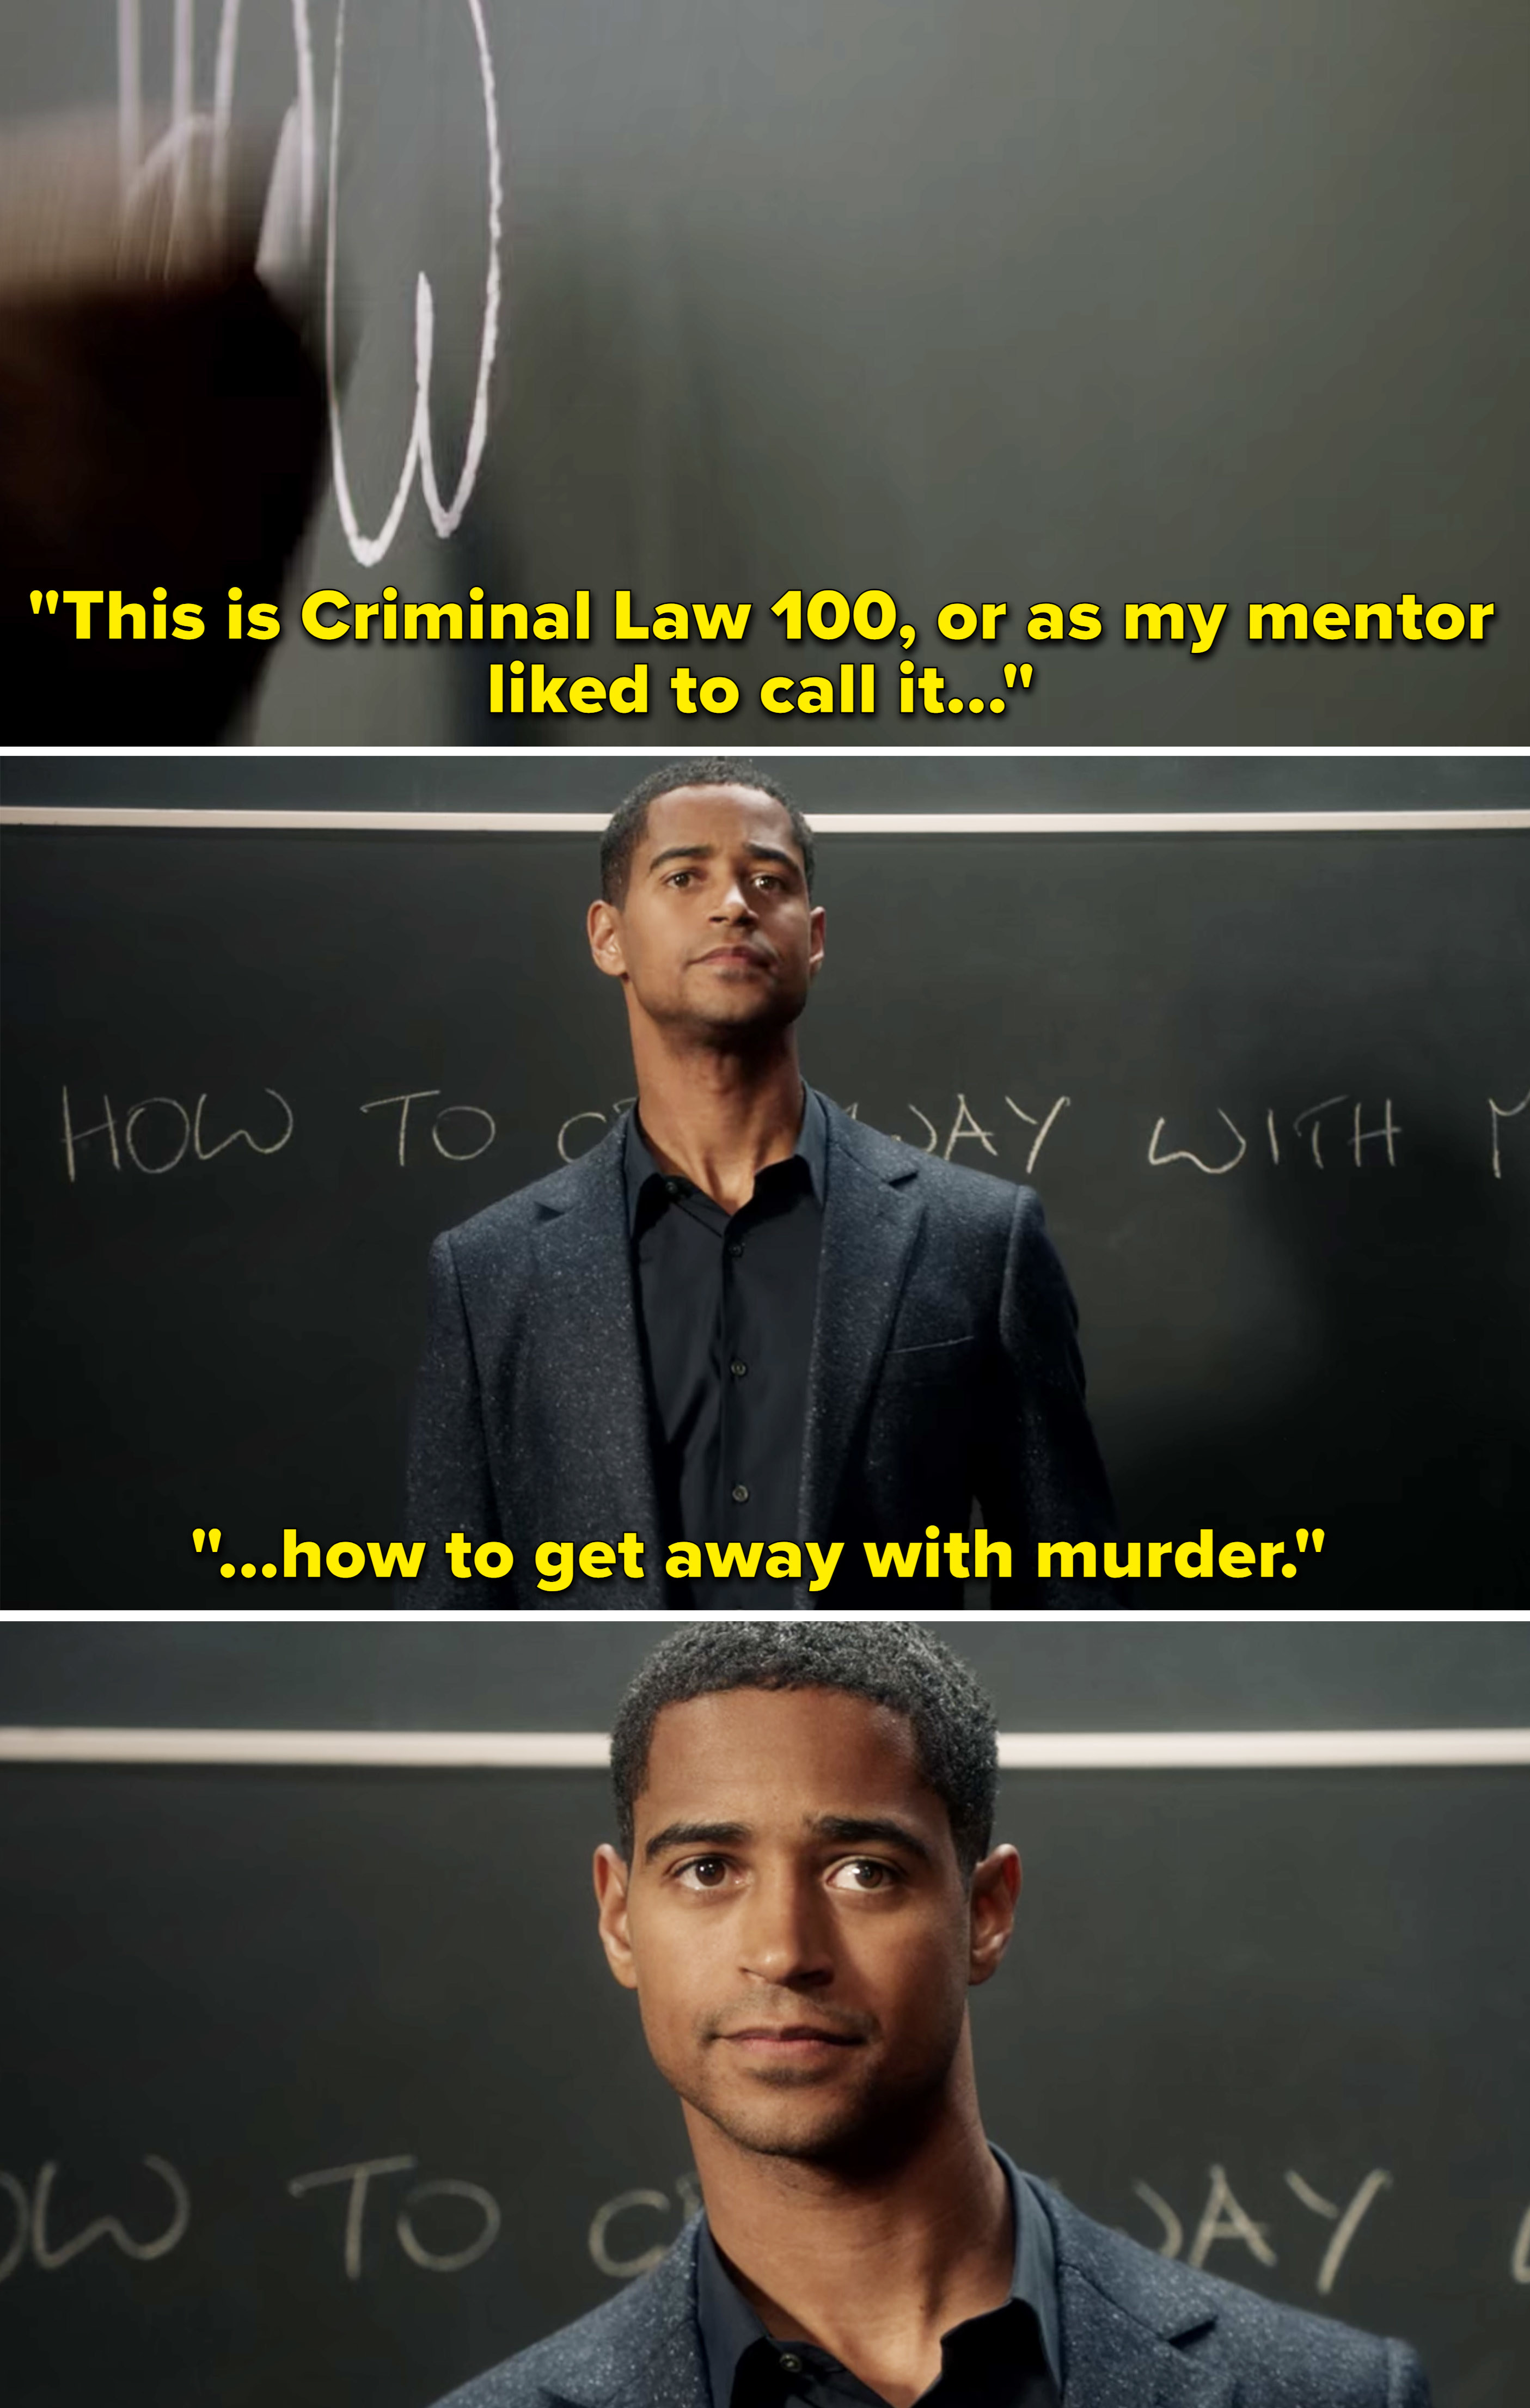 Christopher saying, &quot;This is Criminal Law 100, or as my mentor liked to call it how to get away with murder&quot;